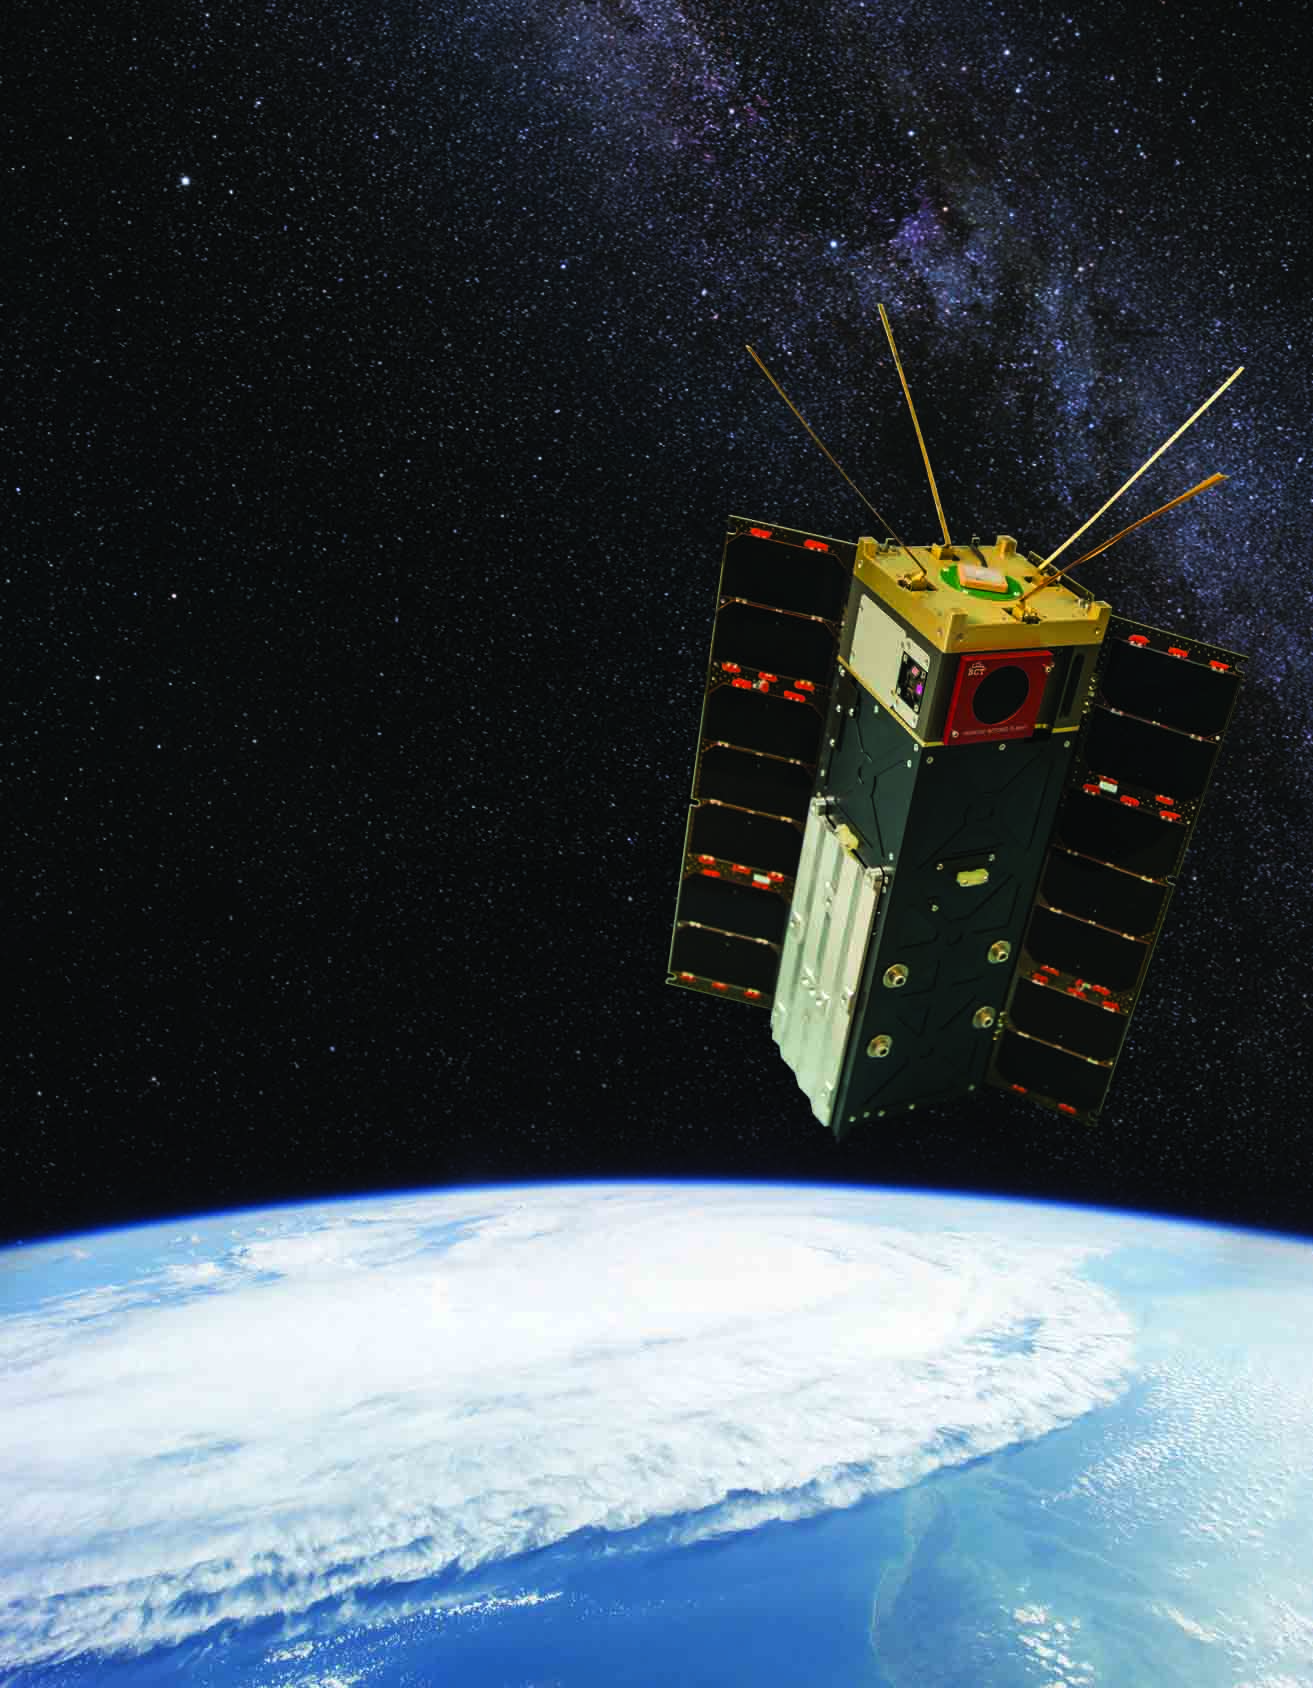 The Space Dynamics Laboratory announced today that satellite operators are flying NASA spacecraft from their homes to help prevent the spread of COVID-19. This August 2019 composite image illustrates NASA’s Hyper-Angular Rainbow Polarimeter CubeSat that is currently being operated by SDL. (Credit: NASA/Space Dynamics Laboratory).